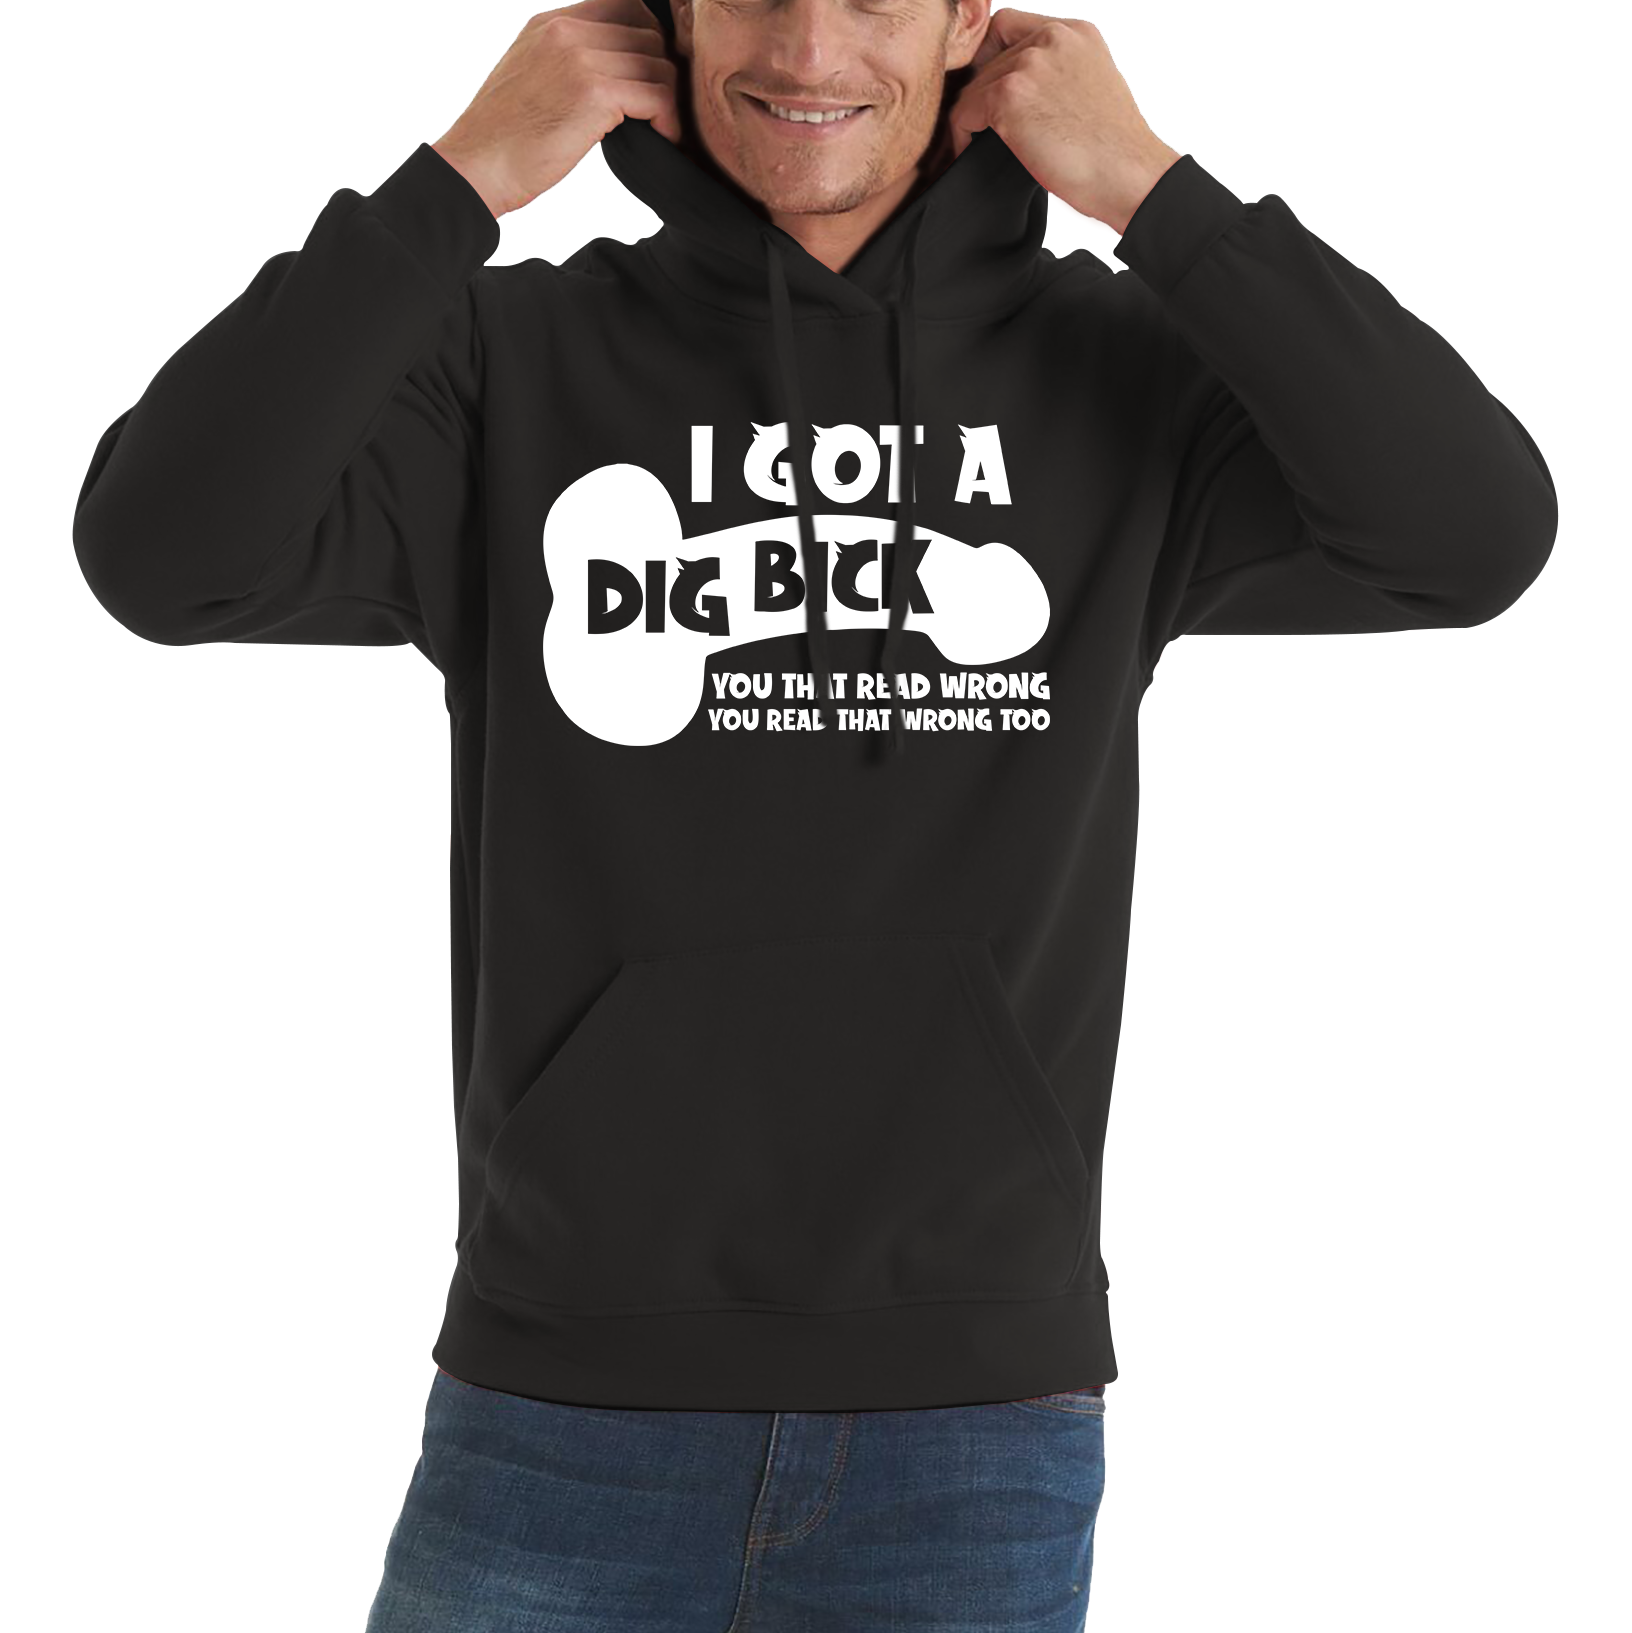 I Got A Dig Bick You That Read Wrong You Read That Wrong Too Funny Novelty Sarcastic Humour Unisex Hoodie